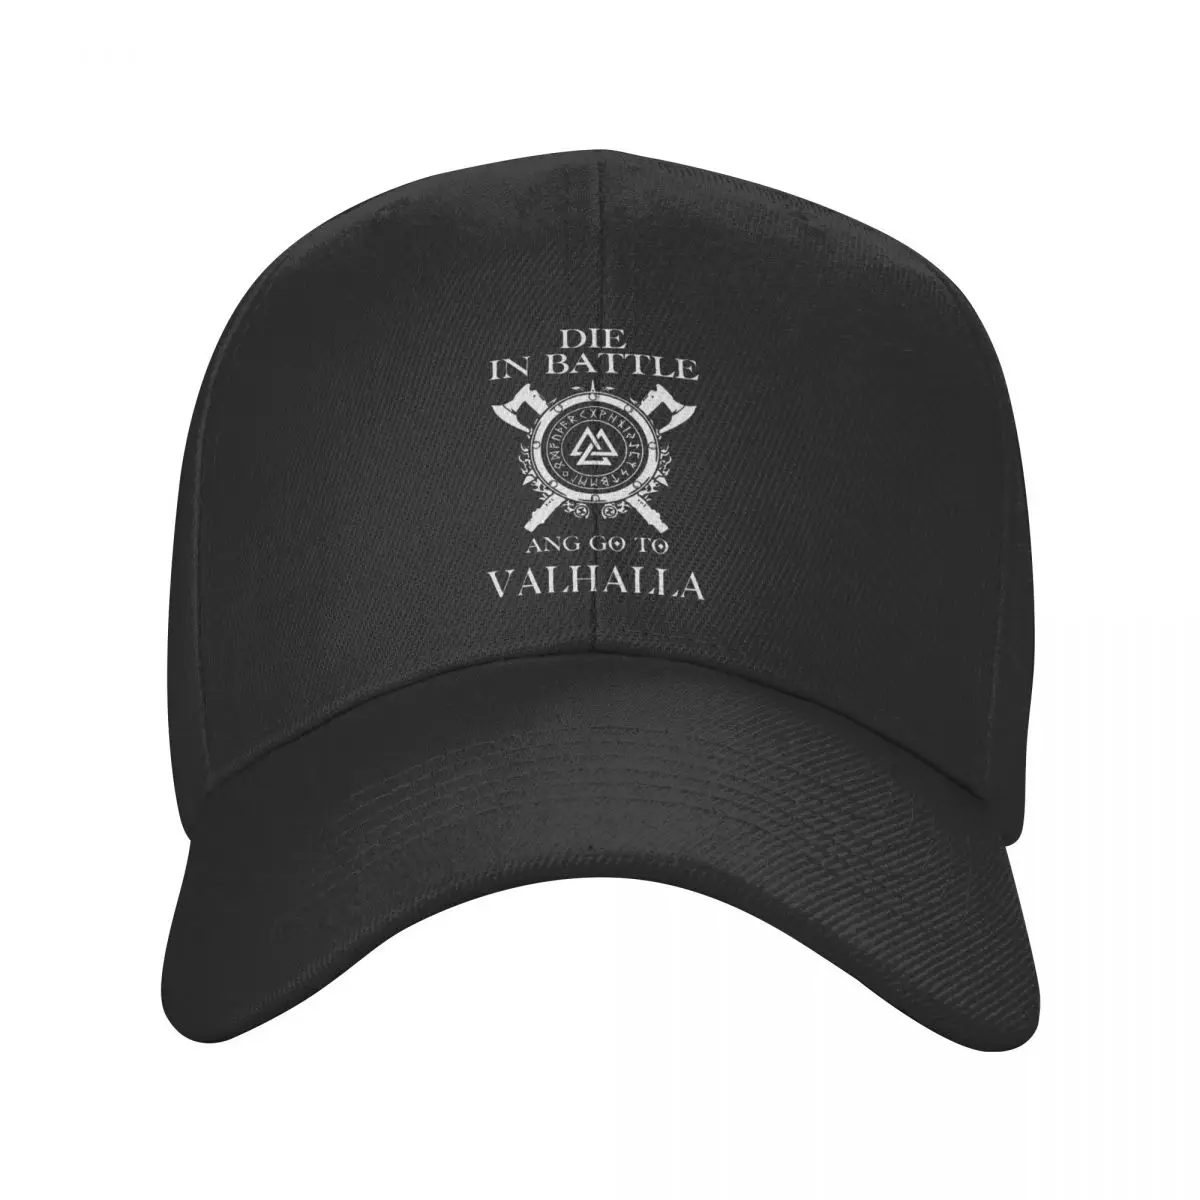 

New Classic Die In Battle Go To Valhalla Baseball Cap Adjustable Unisex Viking Odin Dad Hat Outdoor Snapback Caps